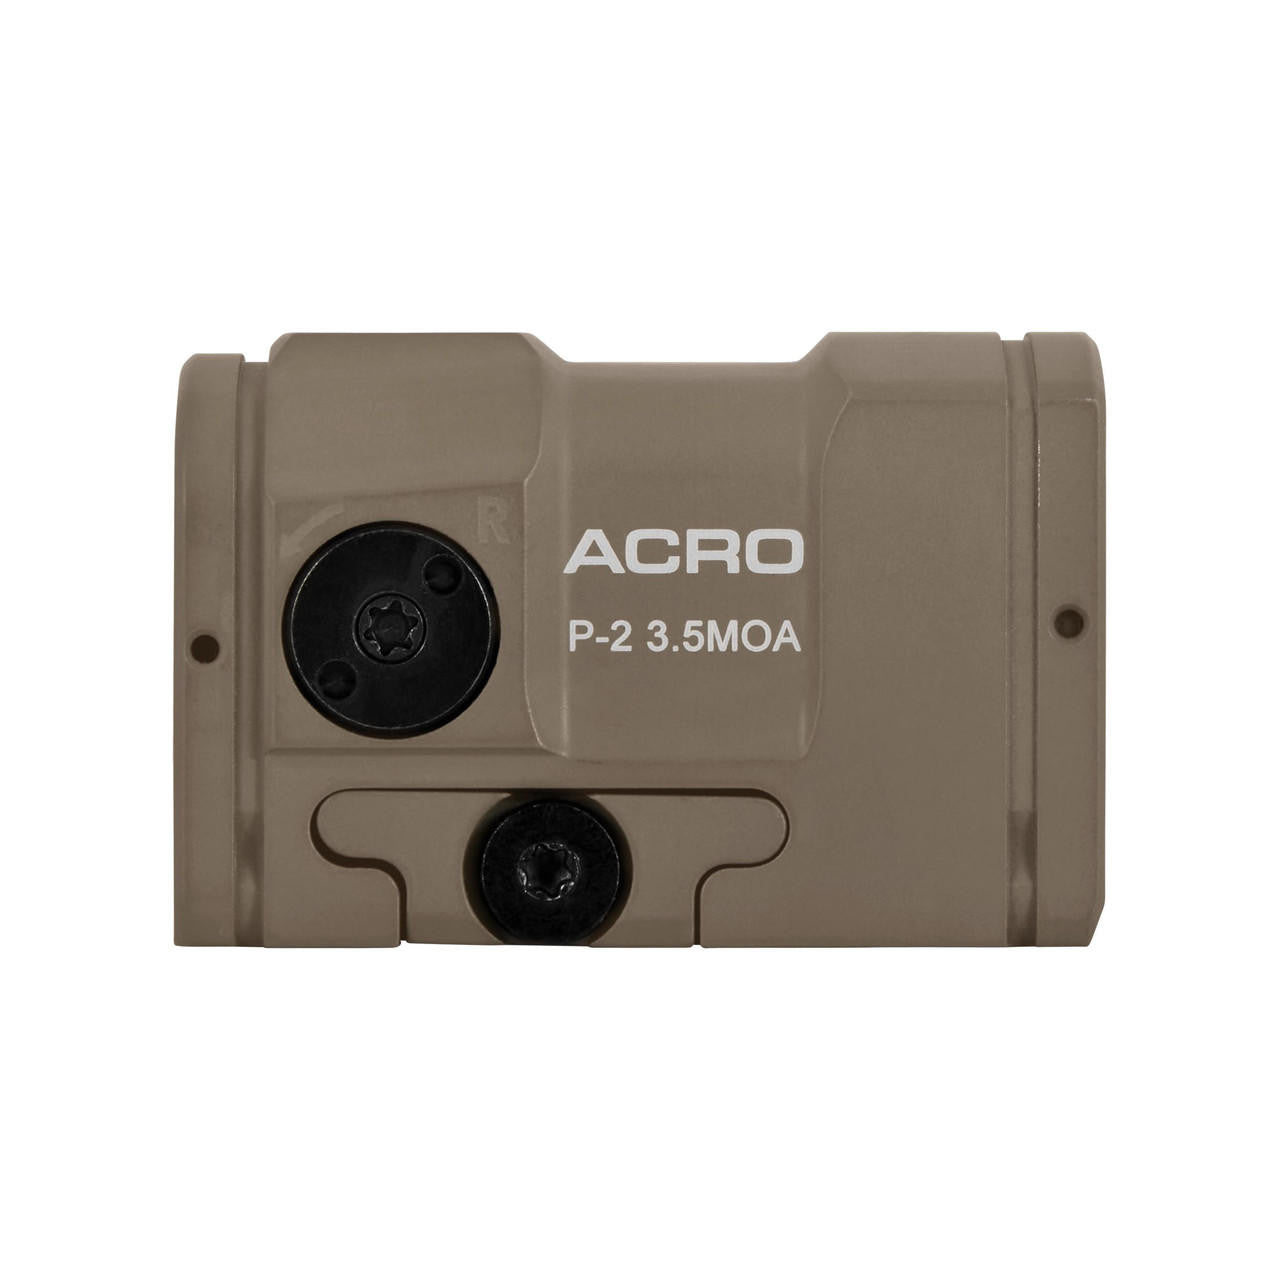 Aimpoint ACRO P-2 Red Dot Sight - 3.5 MOA - ACRO Footprint - FDE Color